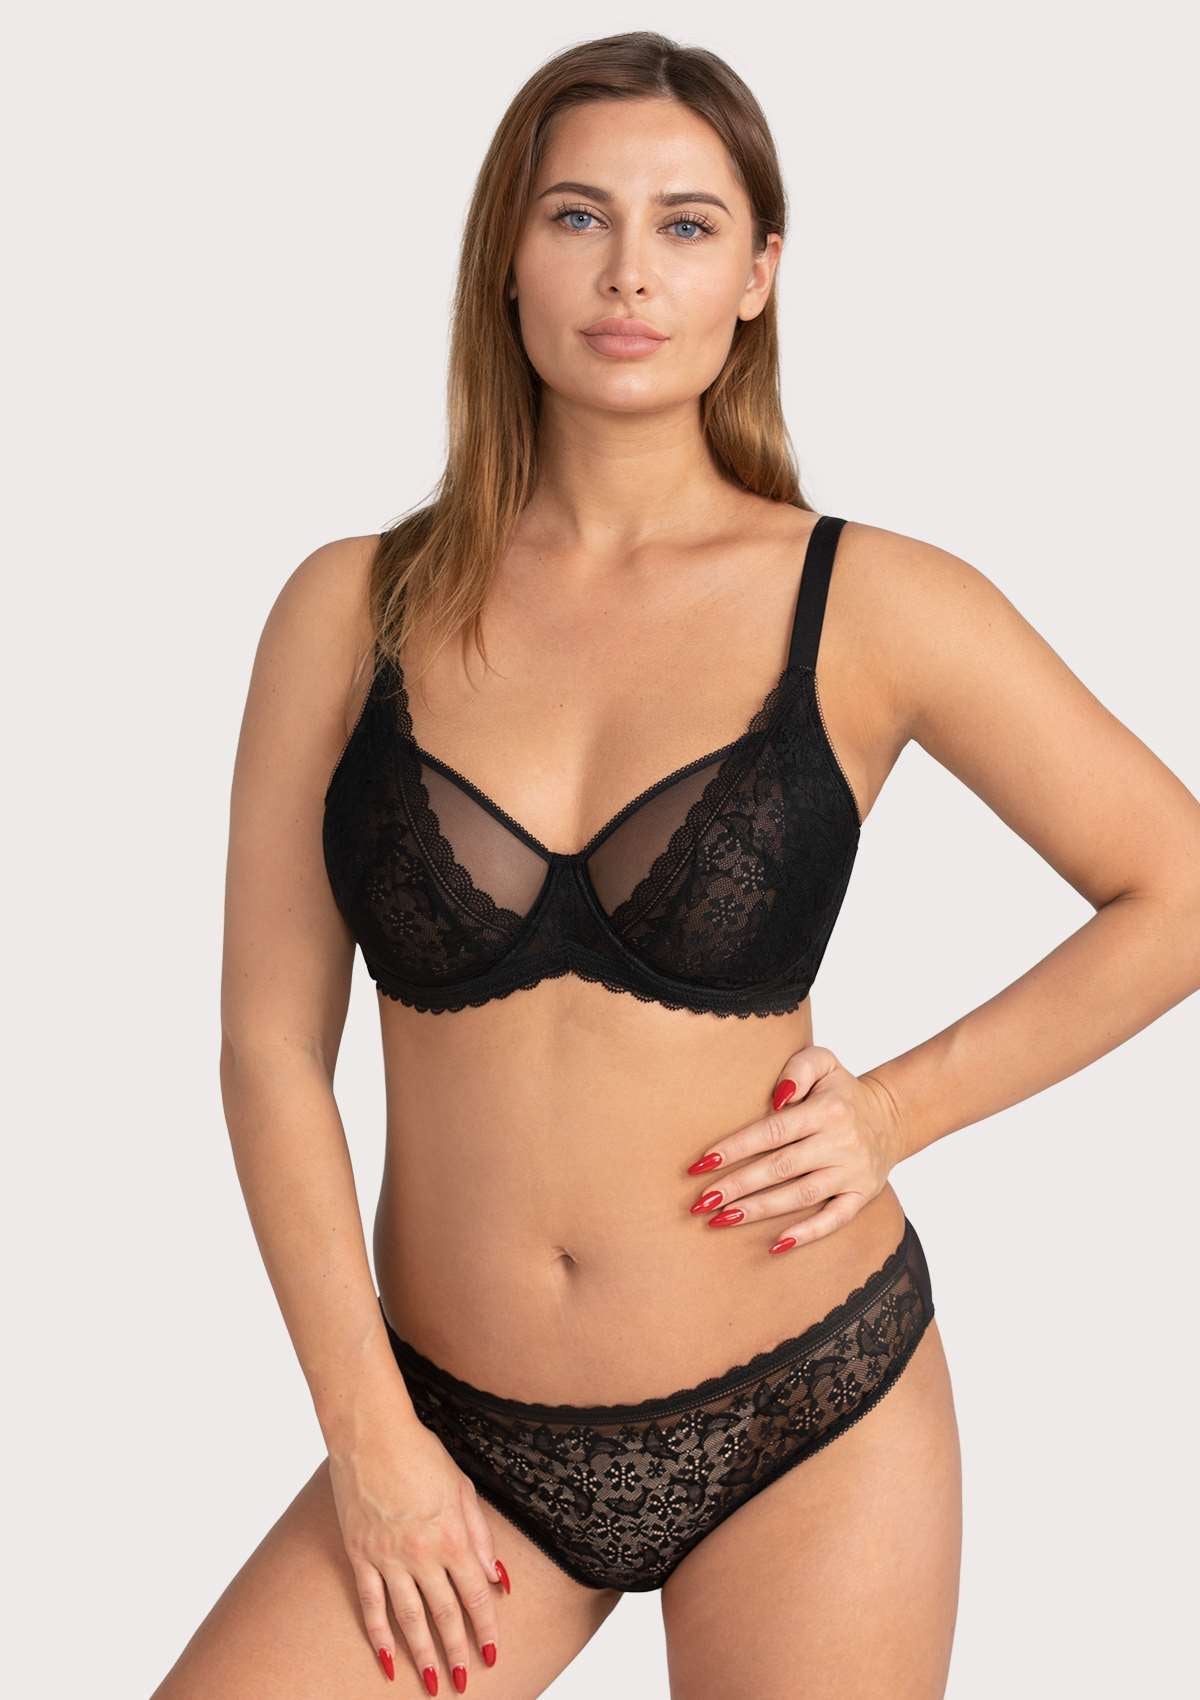 HSIA Anemone Lace Bra And Panties: Back Support Wired Bra - Black / 40 / DDD/F